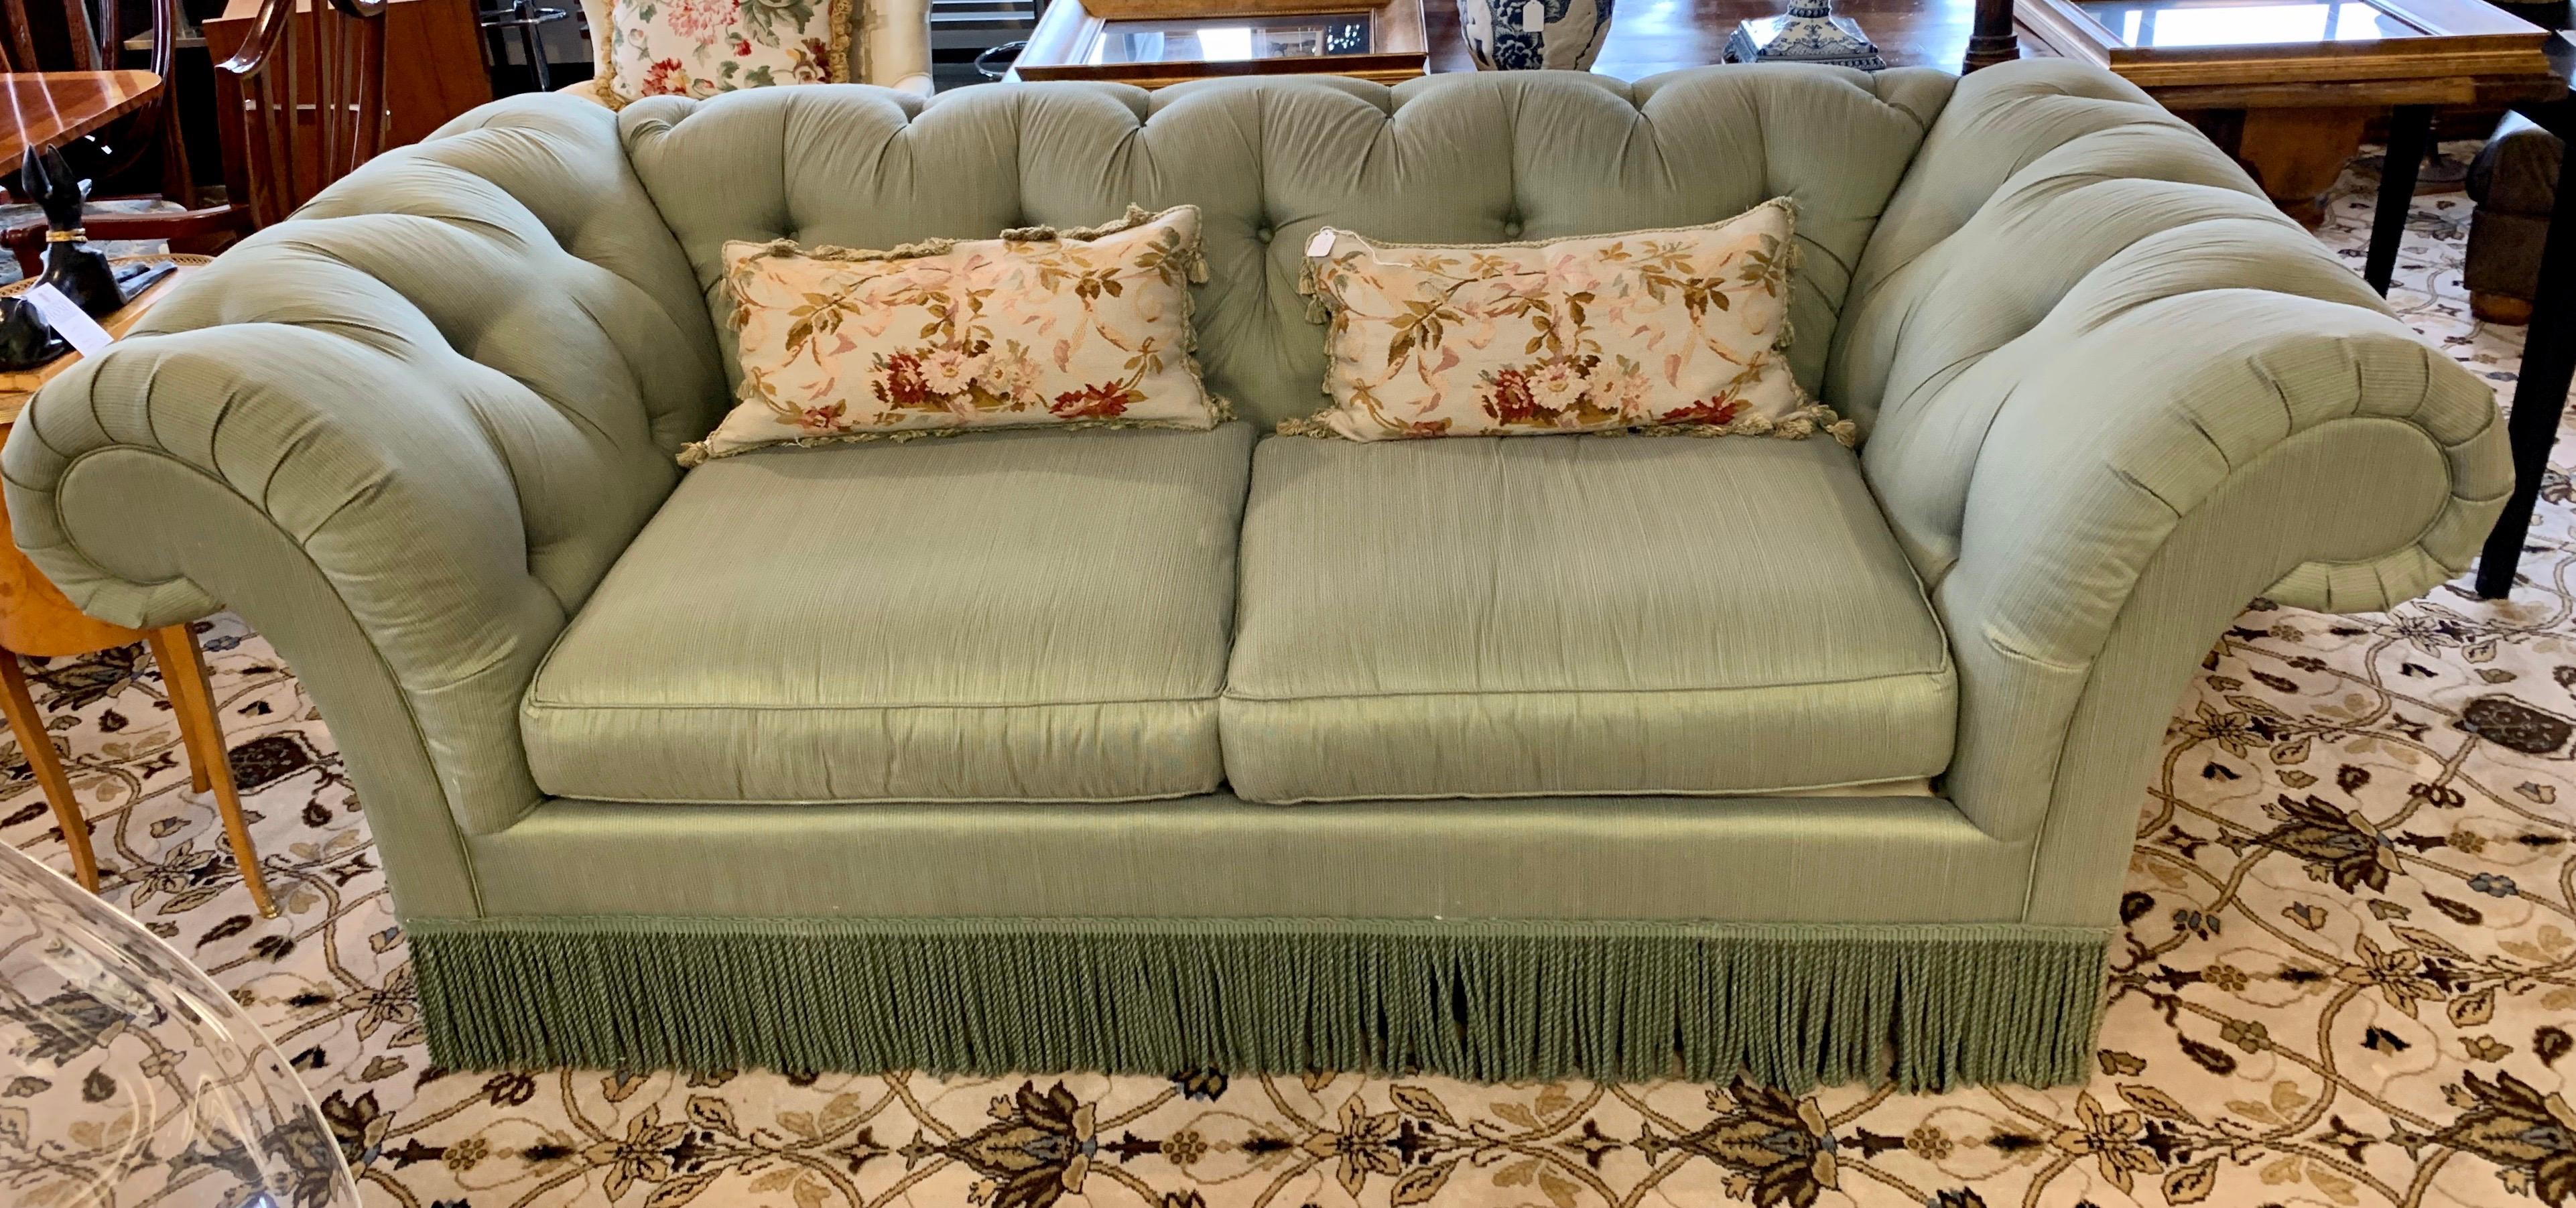 Chesterfield Tufted Sofa Olive Green 4